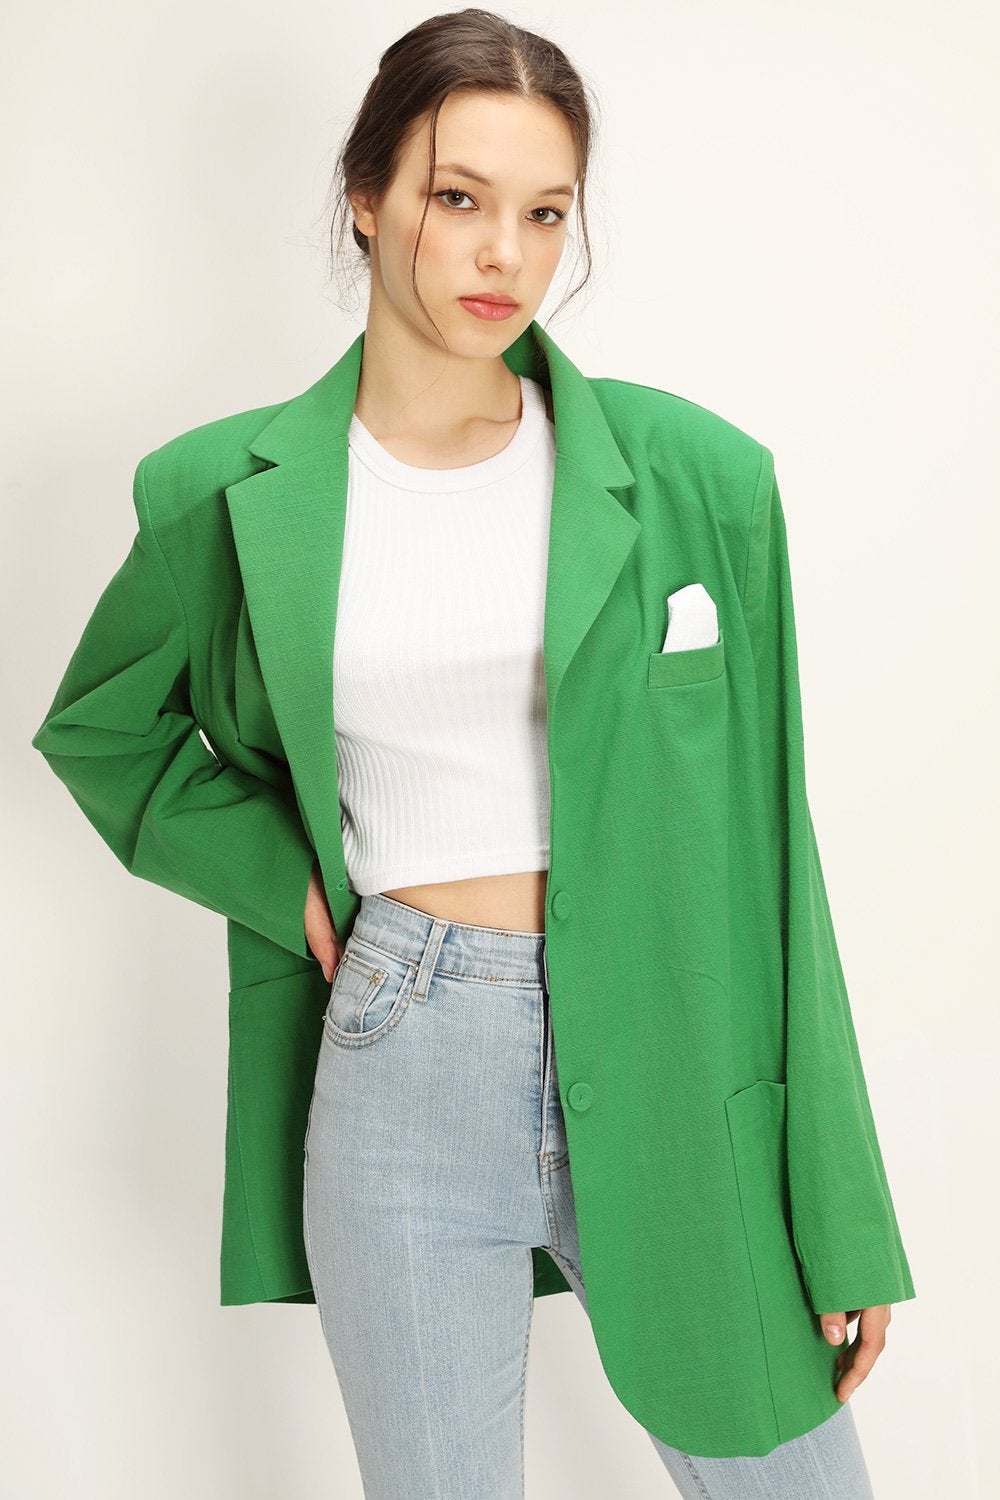 amp; Other Stories + Oversized Single Breasted Blazer